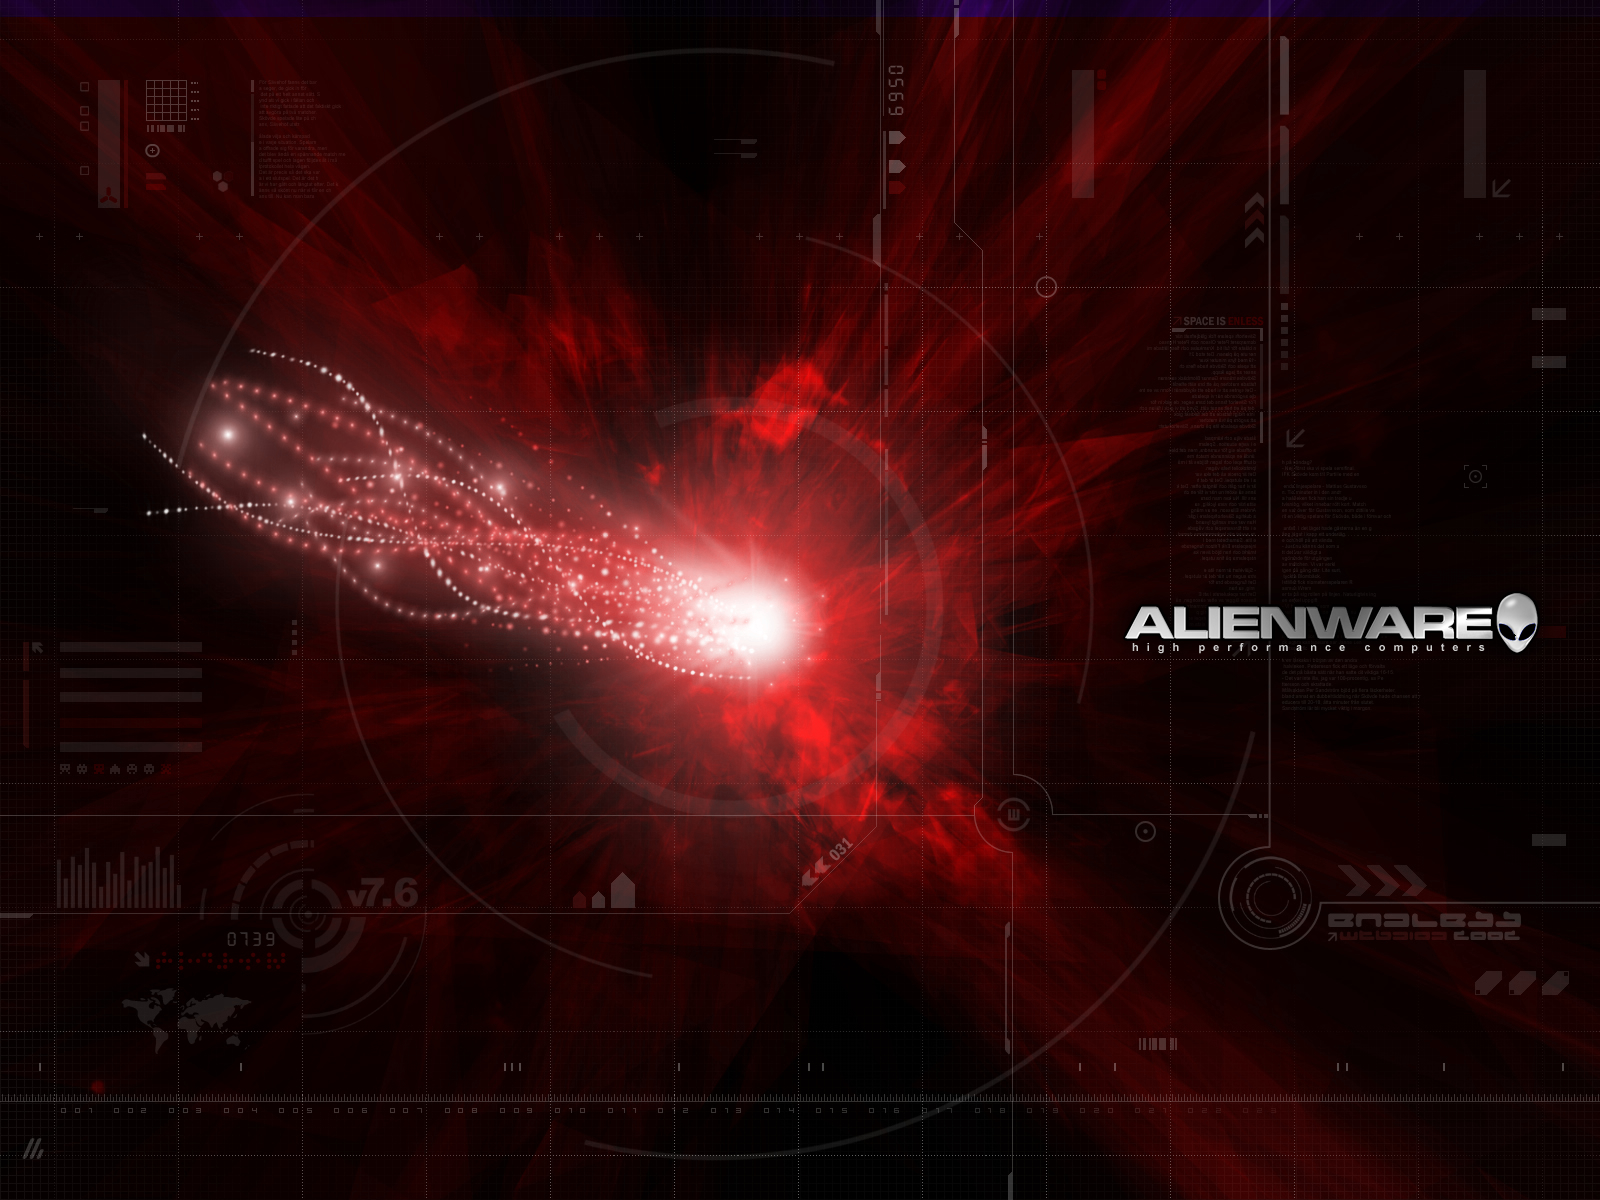 rote alienware wallpaper,rot,text,himmel,astronomisches objekt,linie